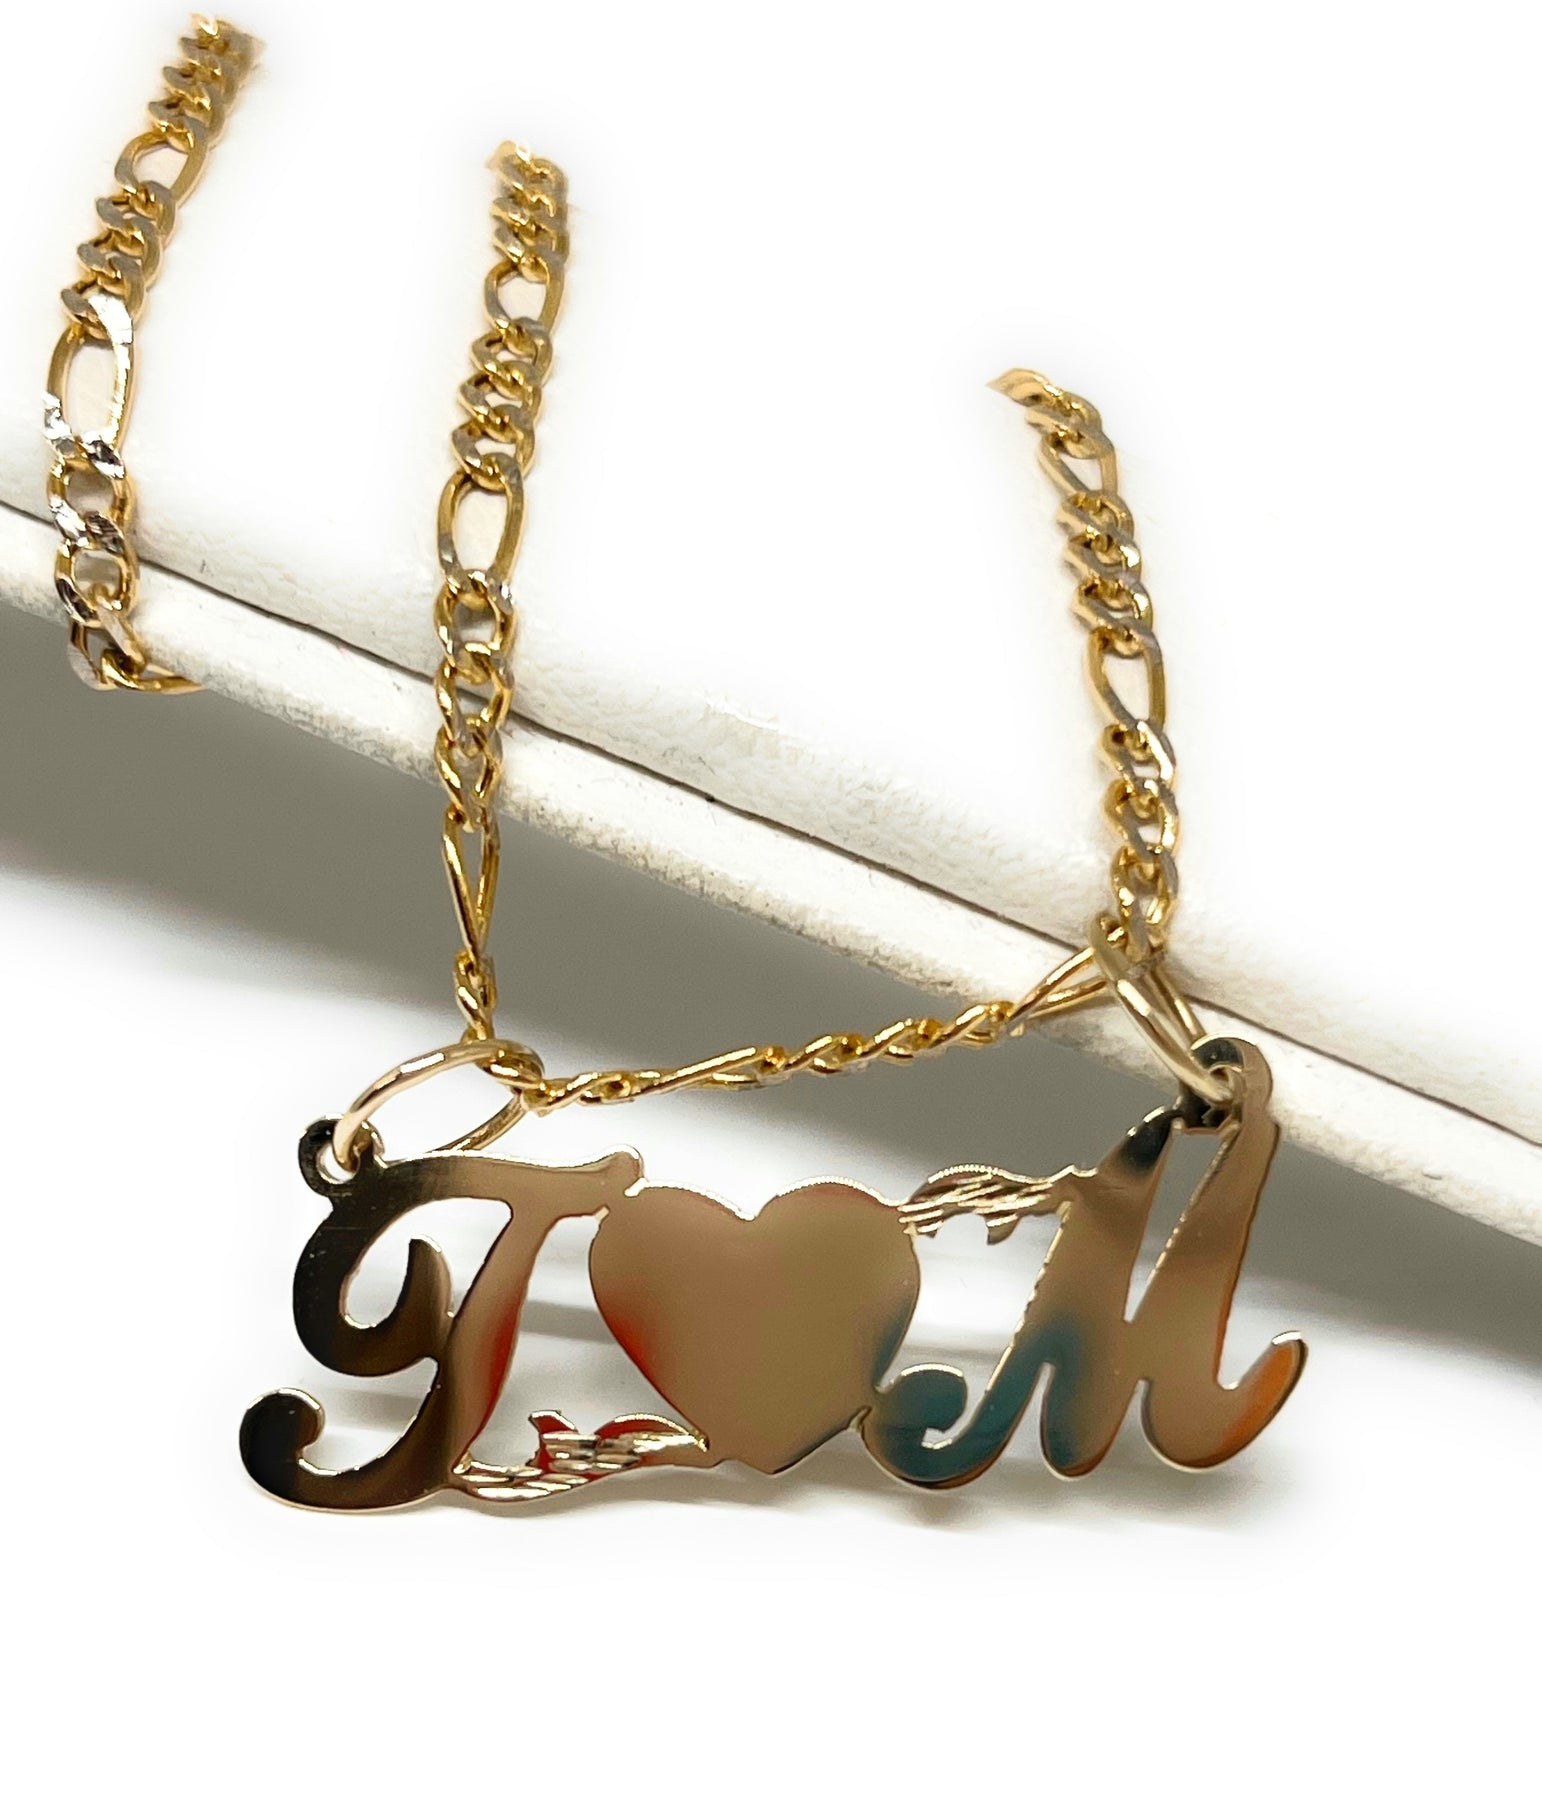 Initial Necklace Gold 14K Two Initial Necklace With Heart 